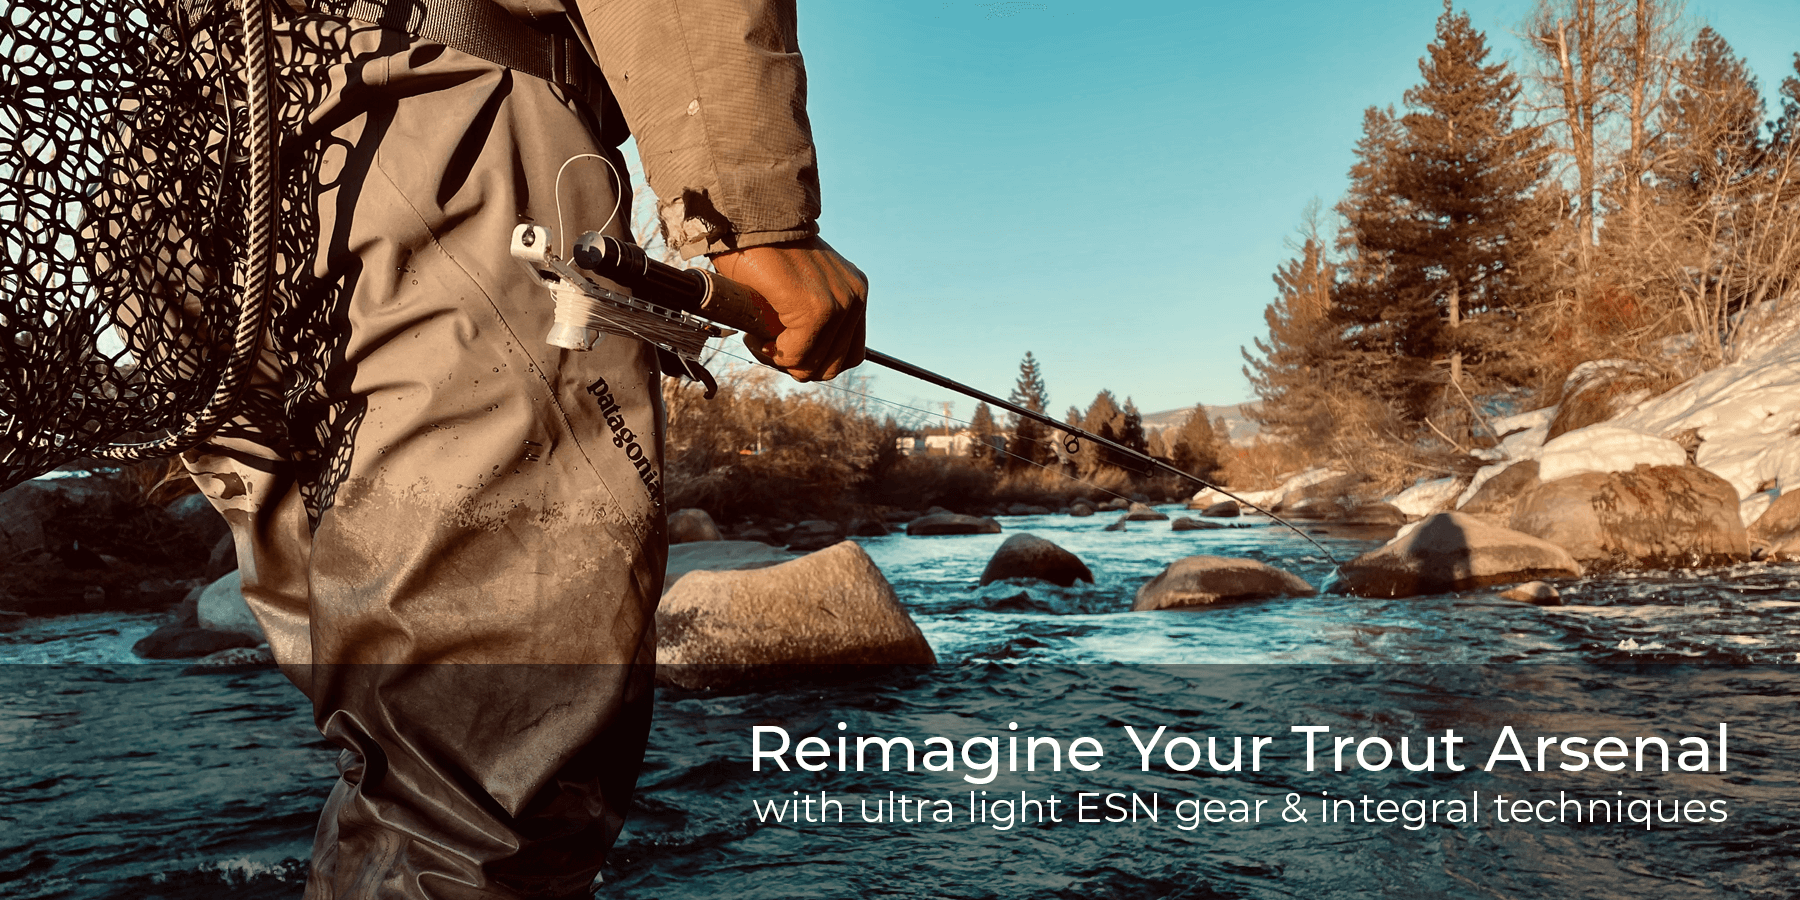 MAVRK Reimagine your trout arsenal with ultra light ESN gear and integral techniques